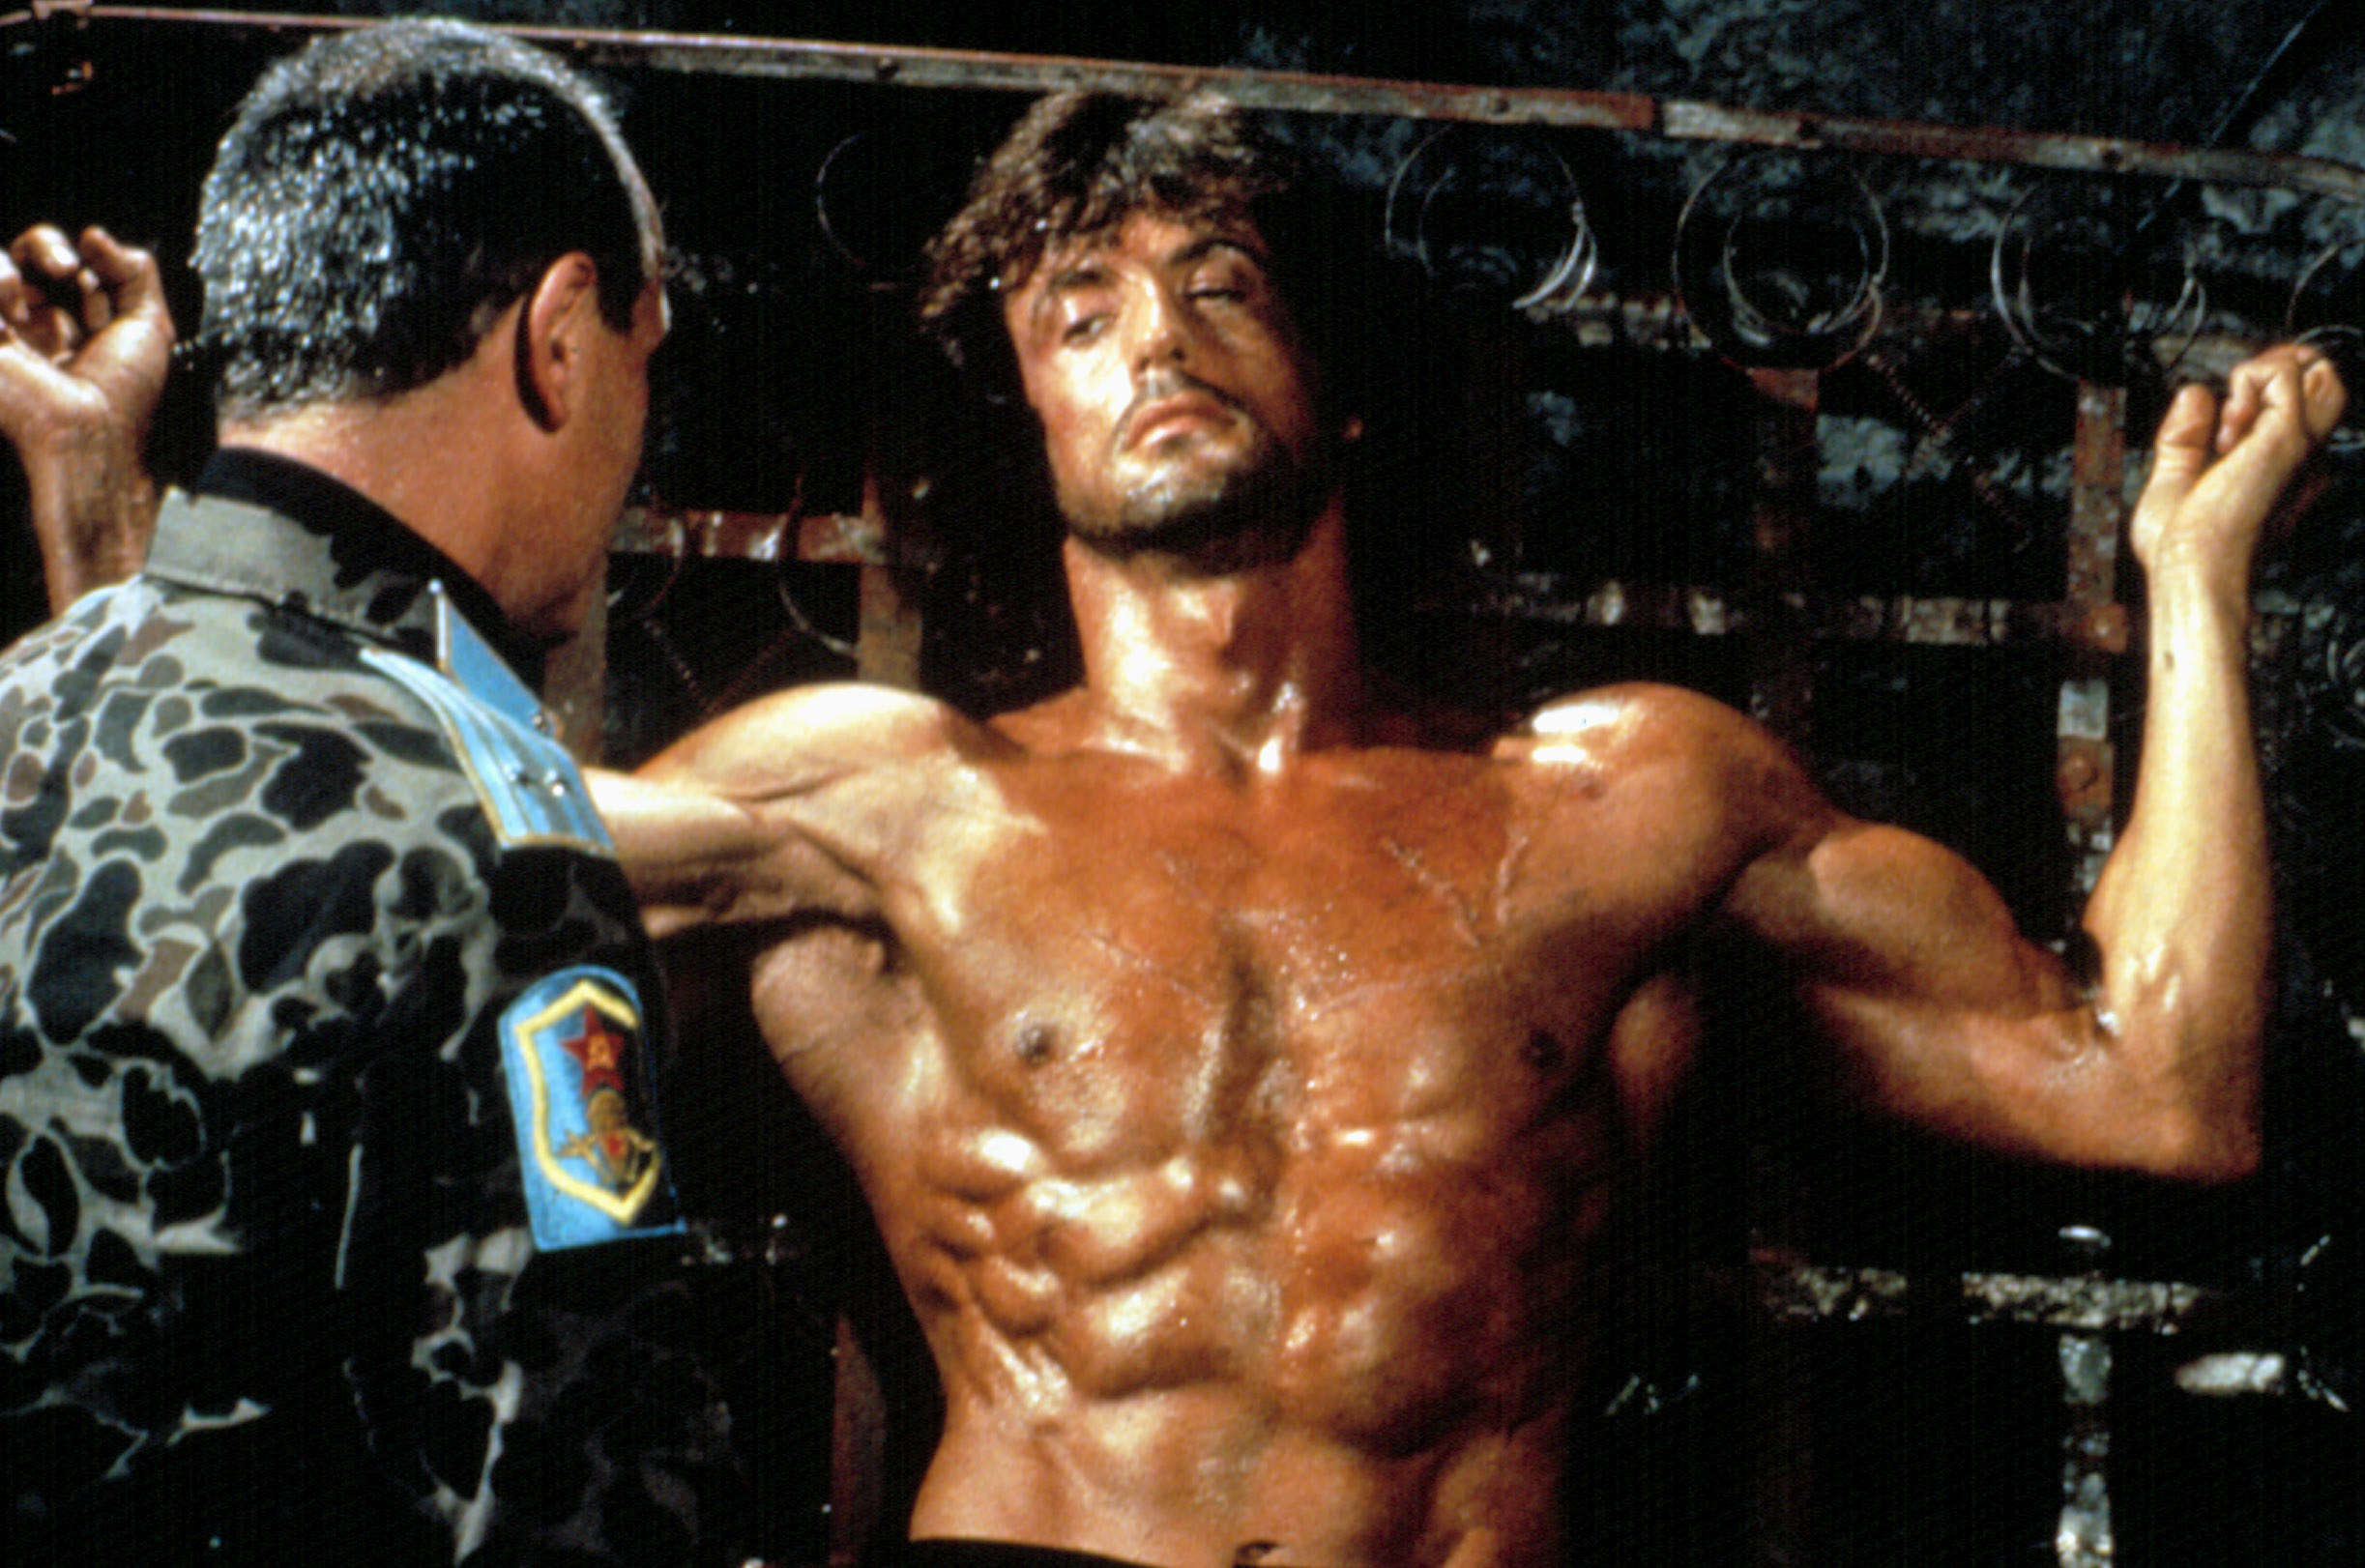 A shirtless man speaks to an officer